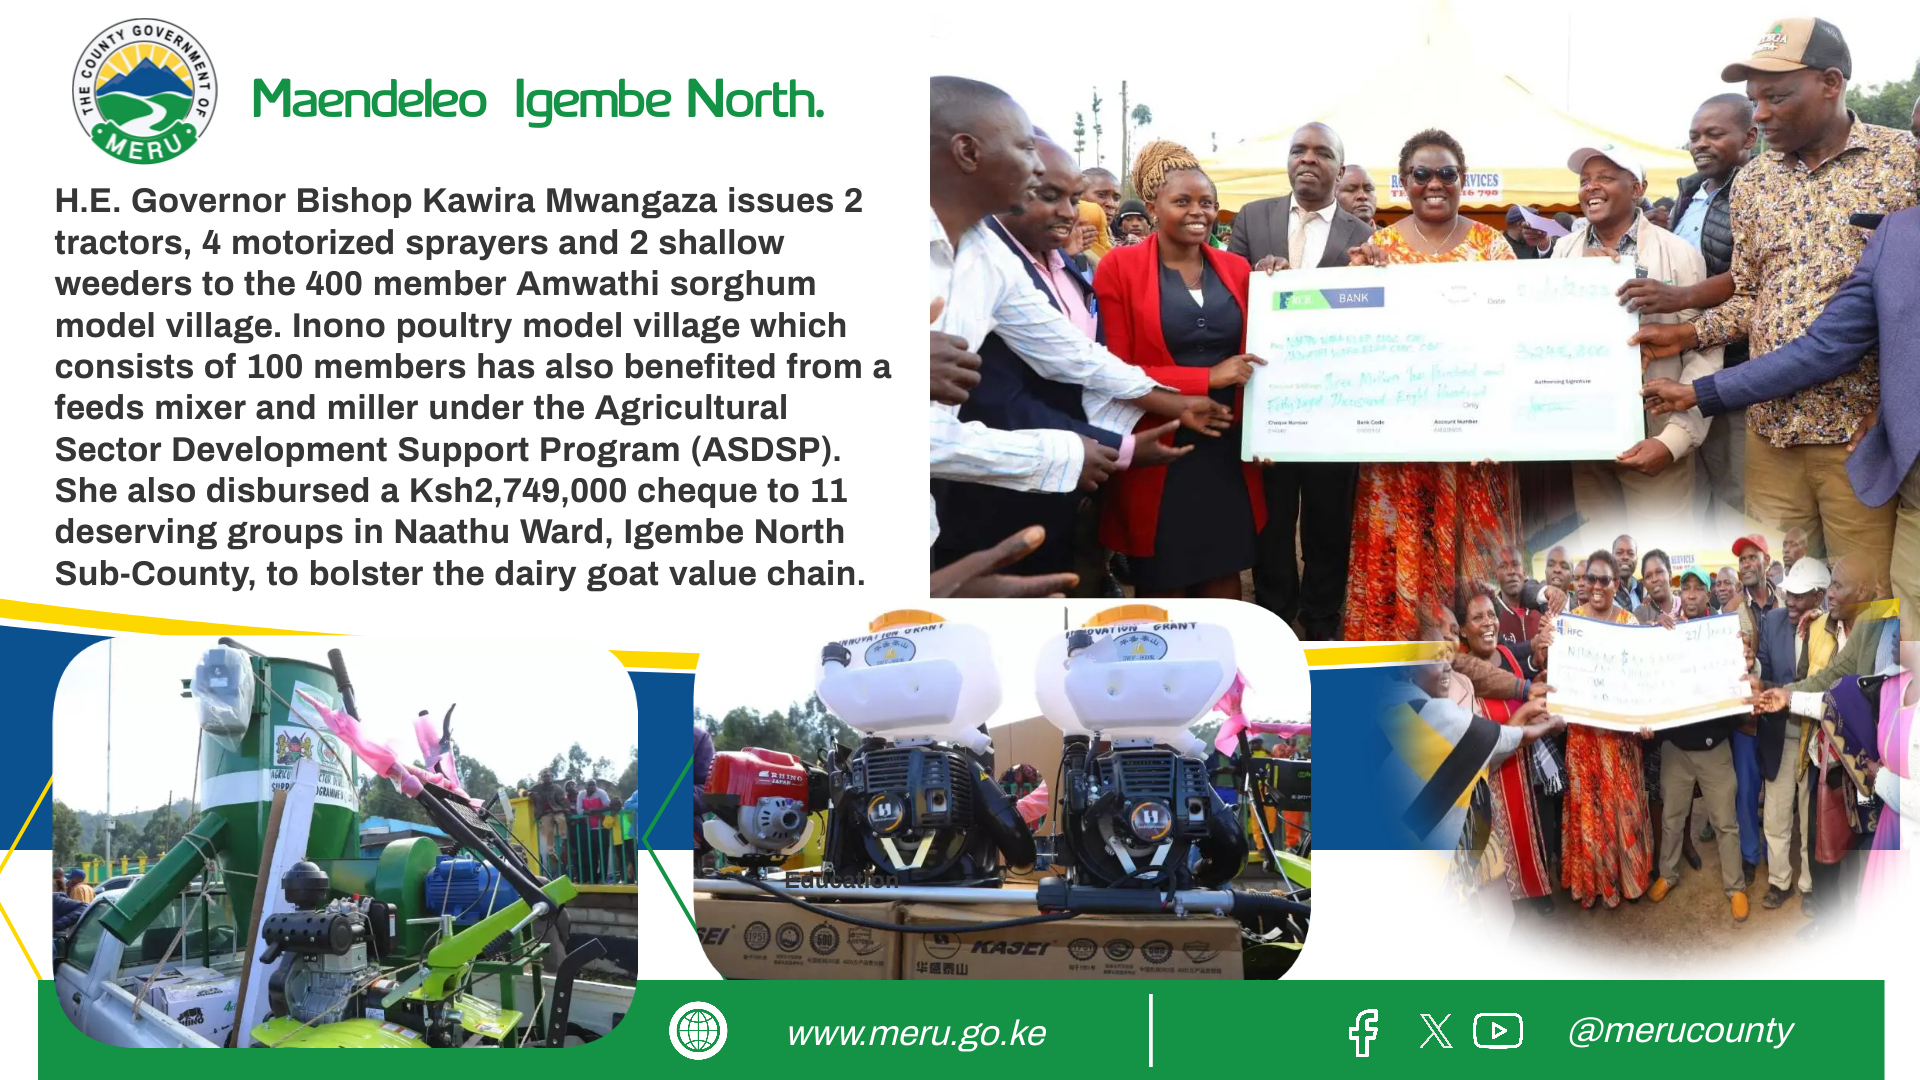 Governor Mwangaza's Agricultural Empowerment Initiative: Transformative Resources Allocated to Amwathi Sorghum Model Village and Community Groups in Igembe North